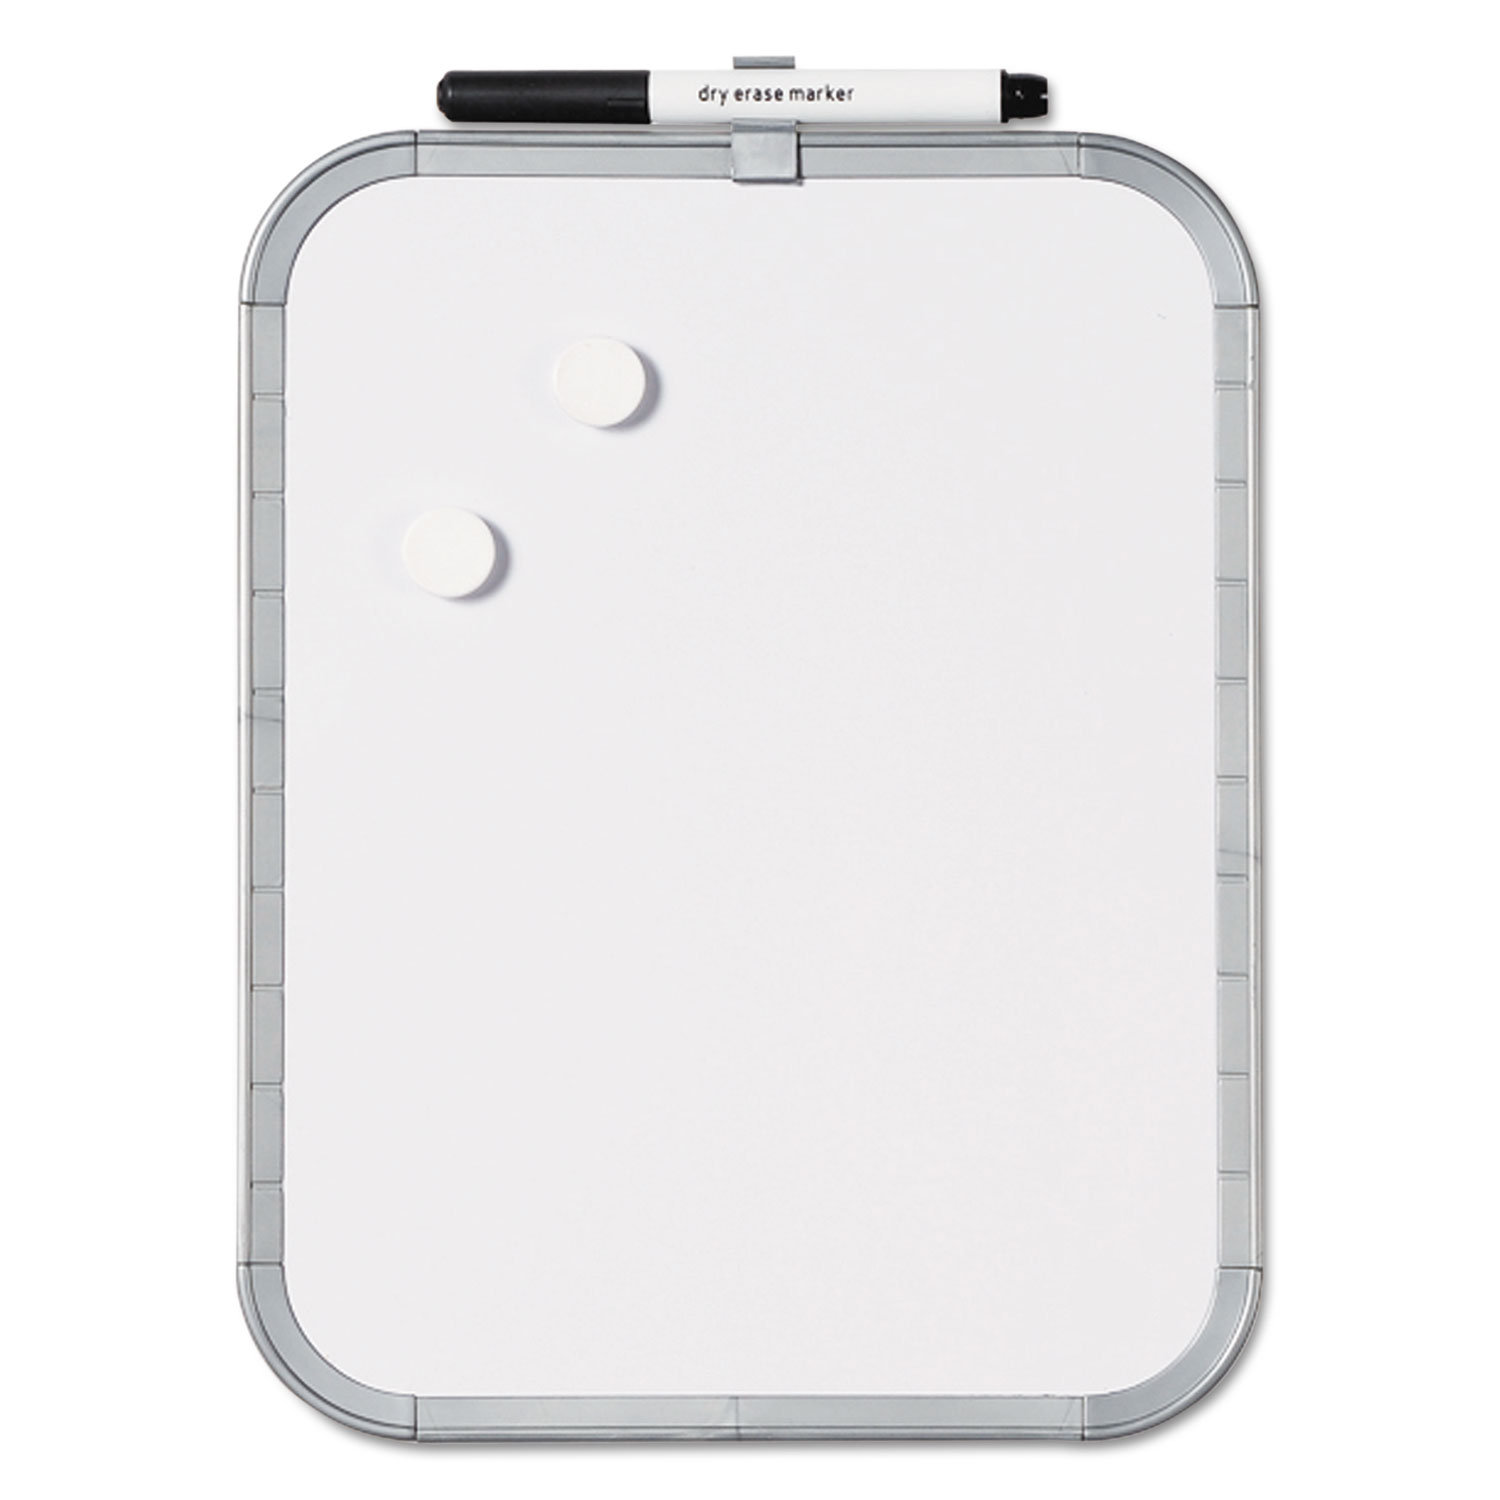  MasterVision CLK030203 Magnetic Dry Erase Board, 11 x 14, White Plastic Frame (BVCCLK020303) 